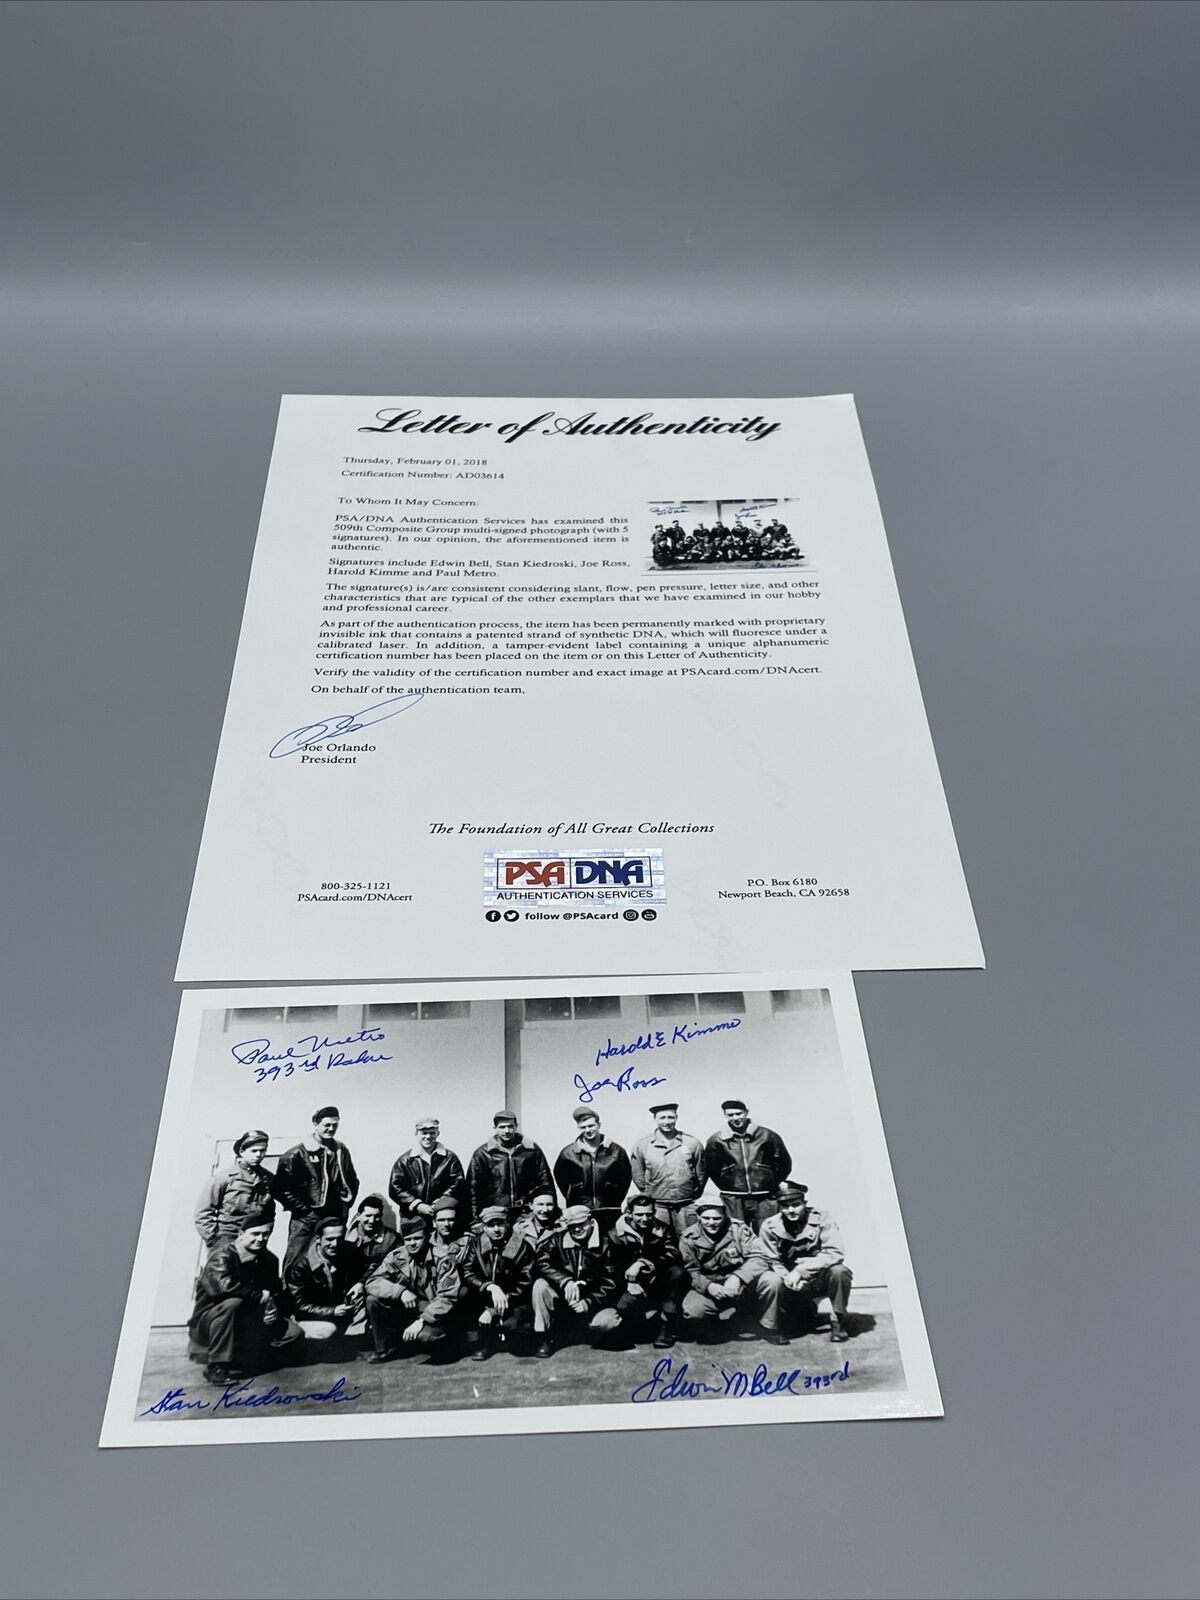 509th Composite Group 5x7 Photo Signed by (5) Bell Kiedrowski Metro PSA/DNA